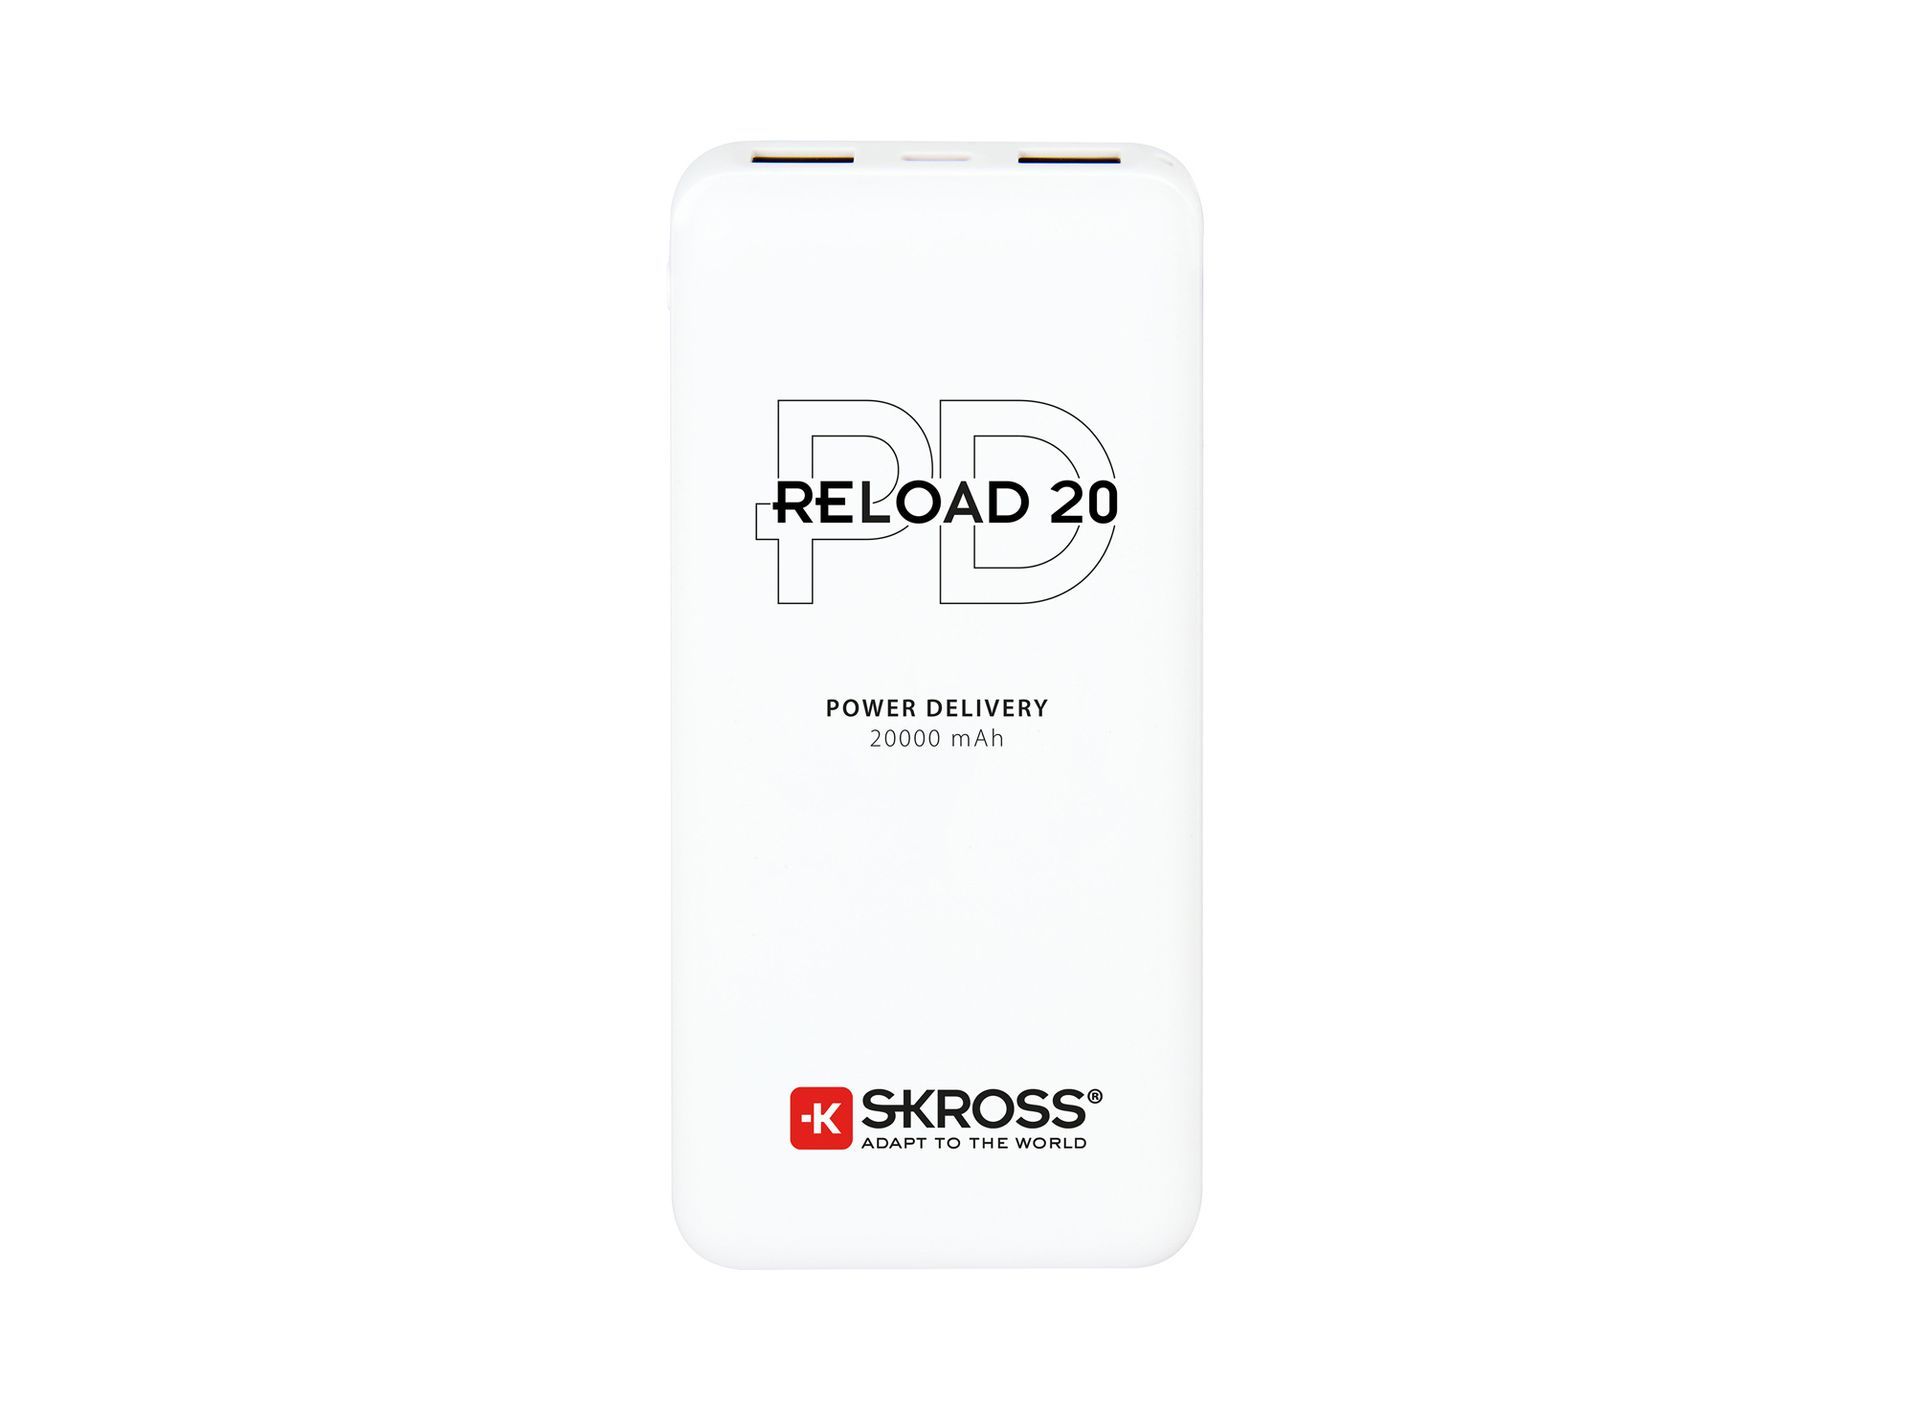 Skross power delivery 20,000 mAh power bank reload 20 PD front